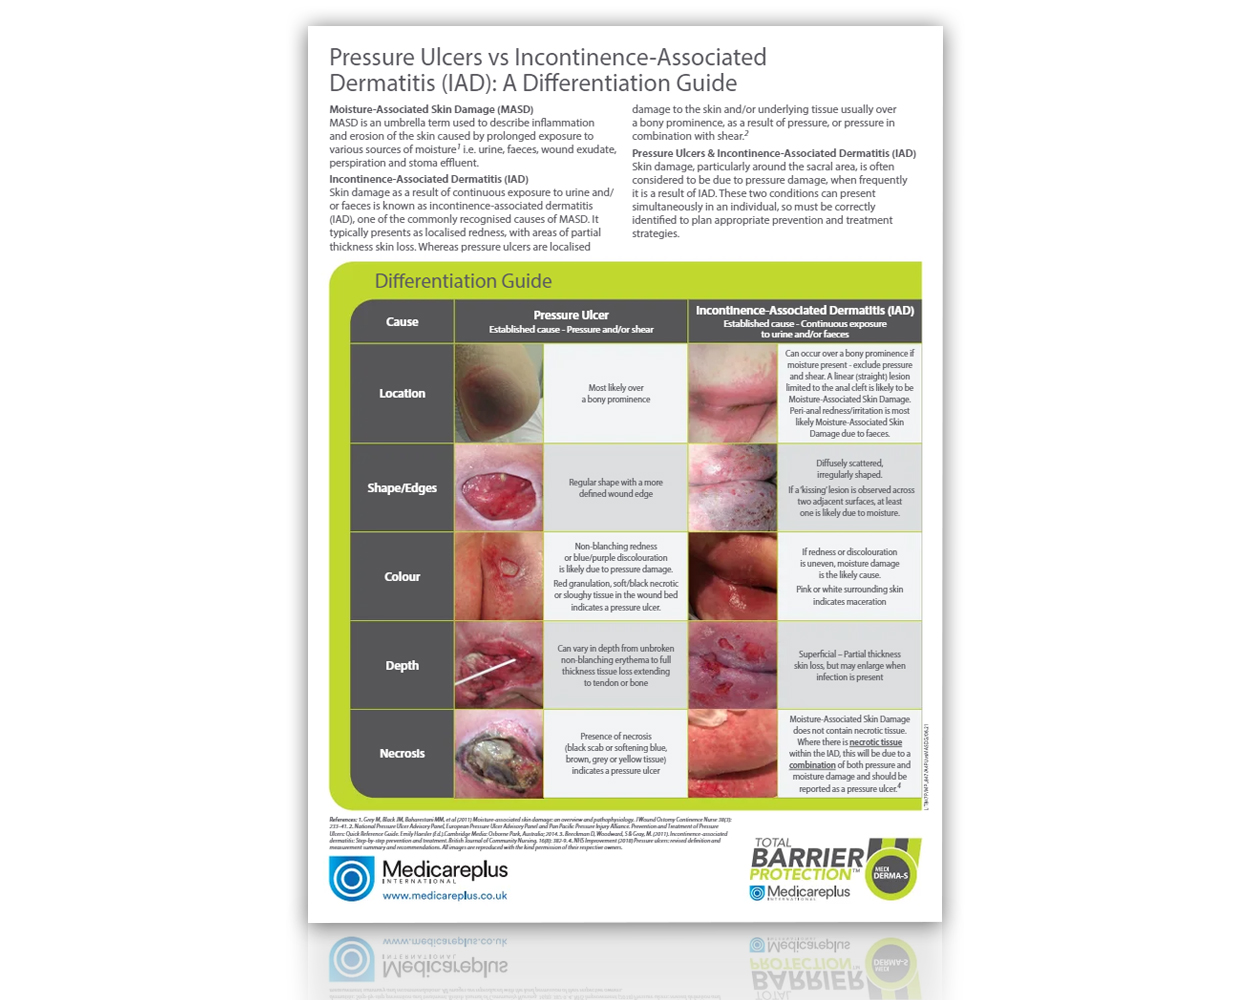 Pressure Ulcers vs Incontinence -Associated Dermatitis (IAD): A Differentiation Guide